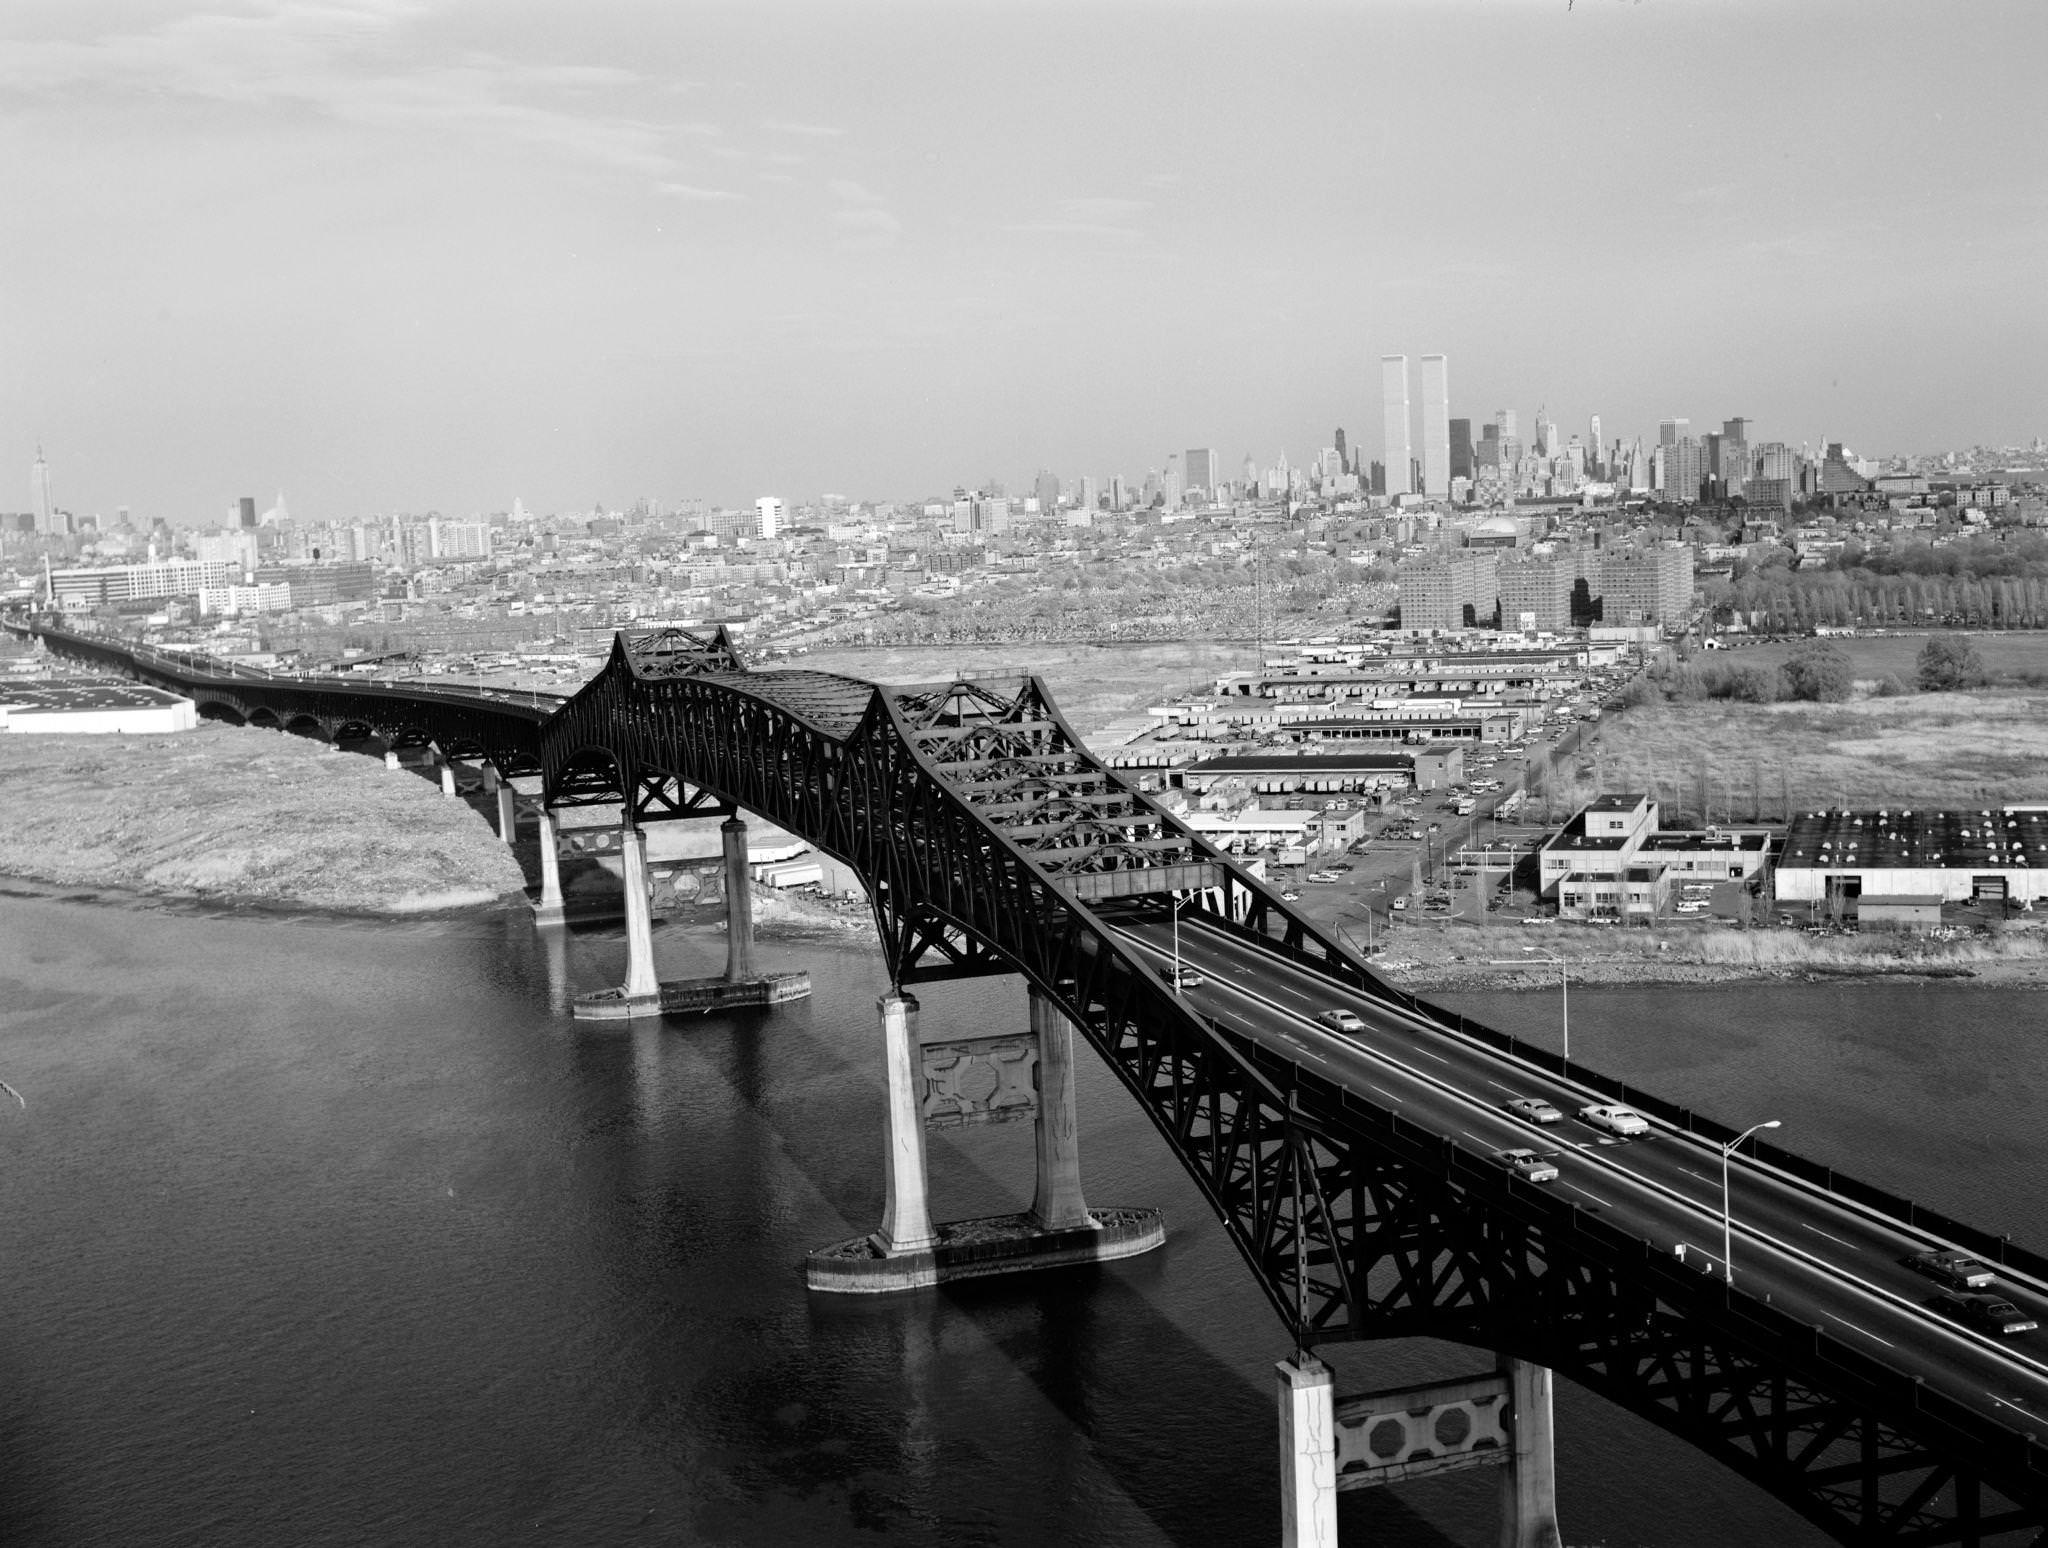 Aerial view looking east over the Pulaski Skyway which spans the Passaic River, Jersey City, New Jersey, 1978.